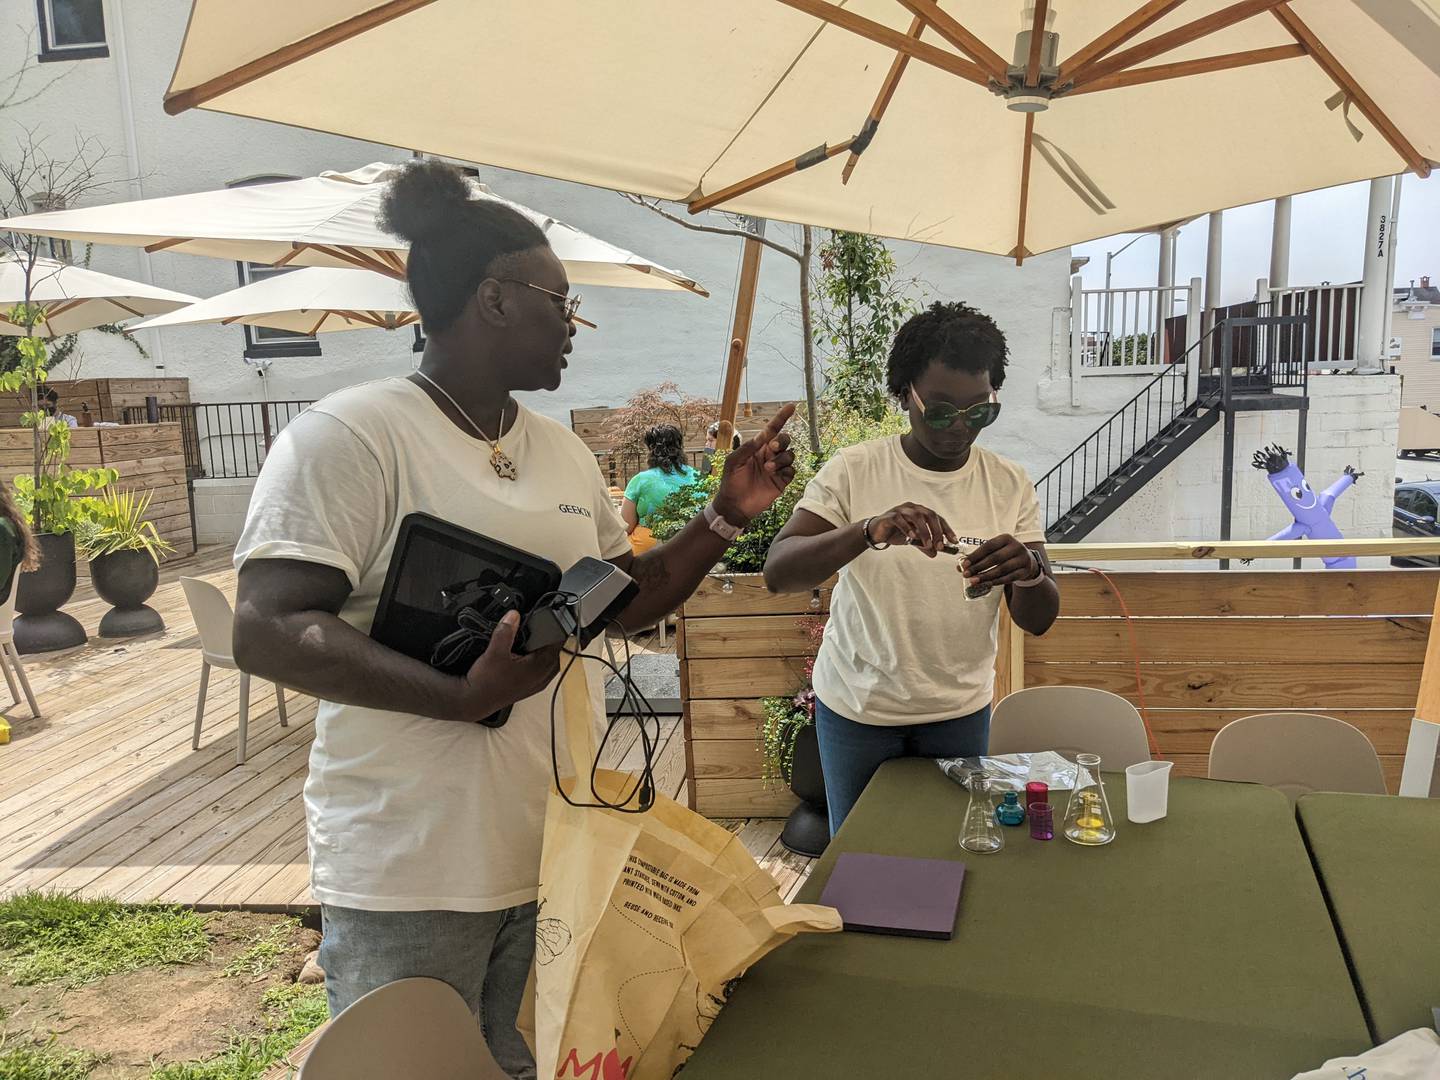 Nnadagi and Louise Isla are setting up their science themed booth at Good Neighbor to launch their coffee brand "Before Tush."